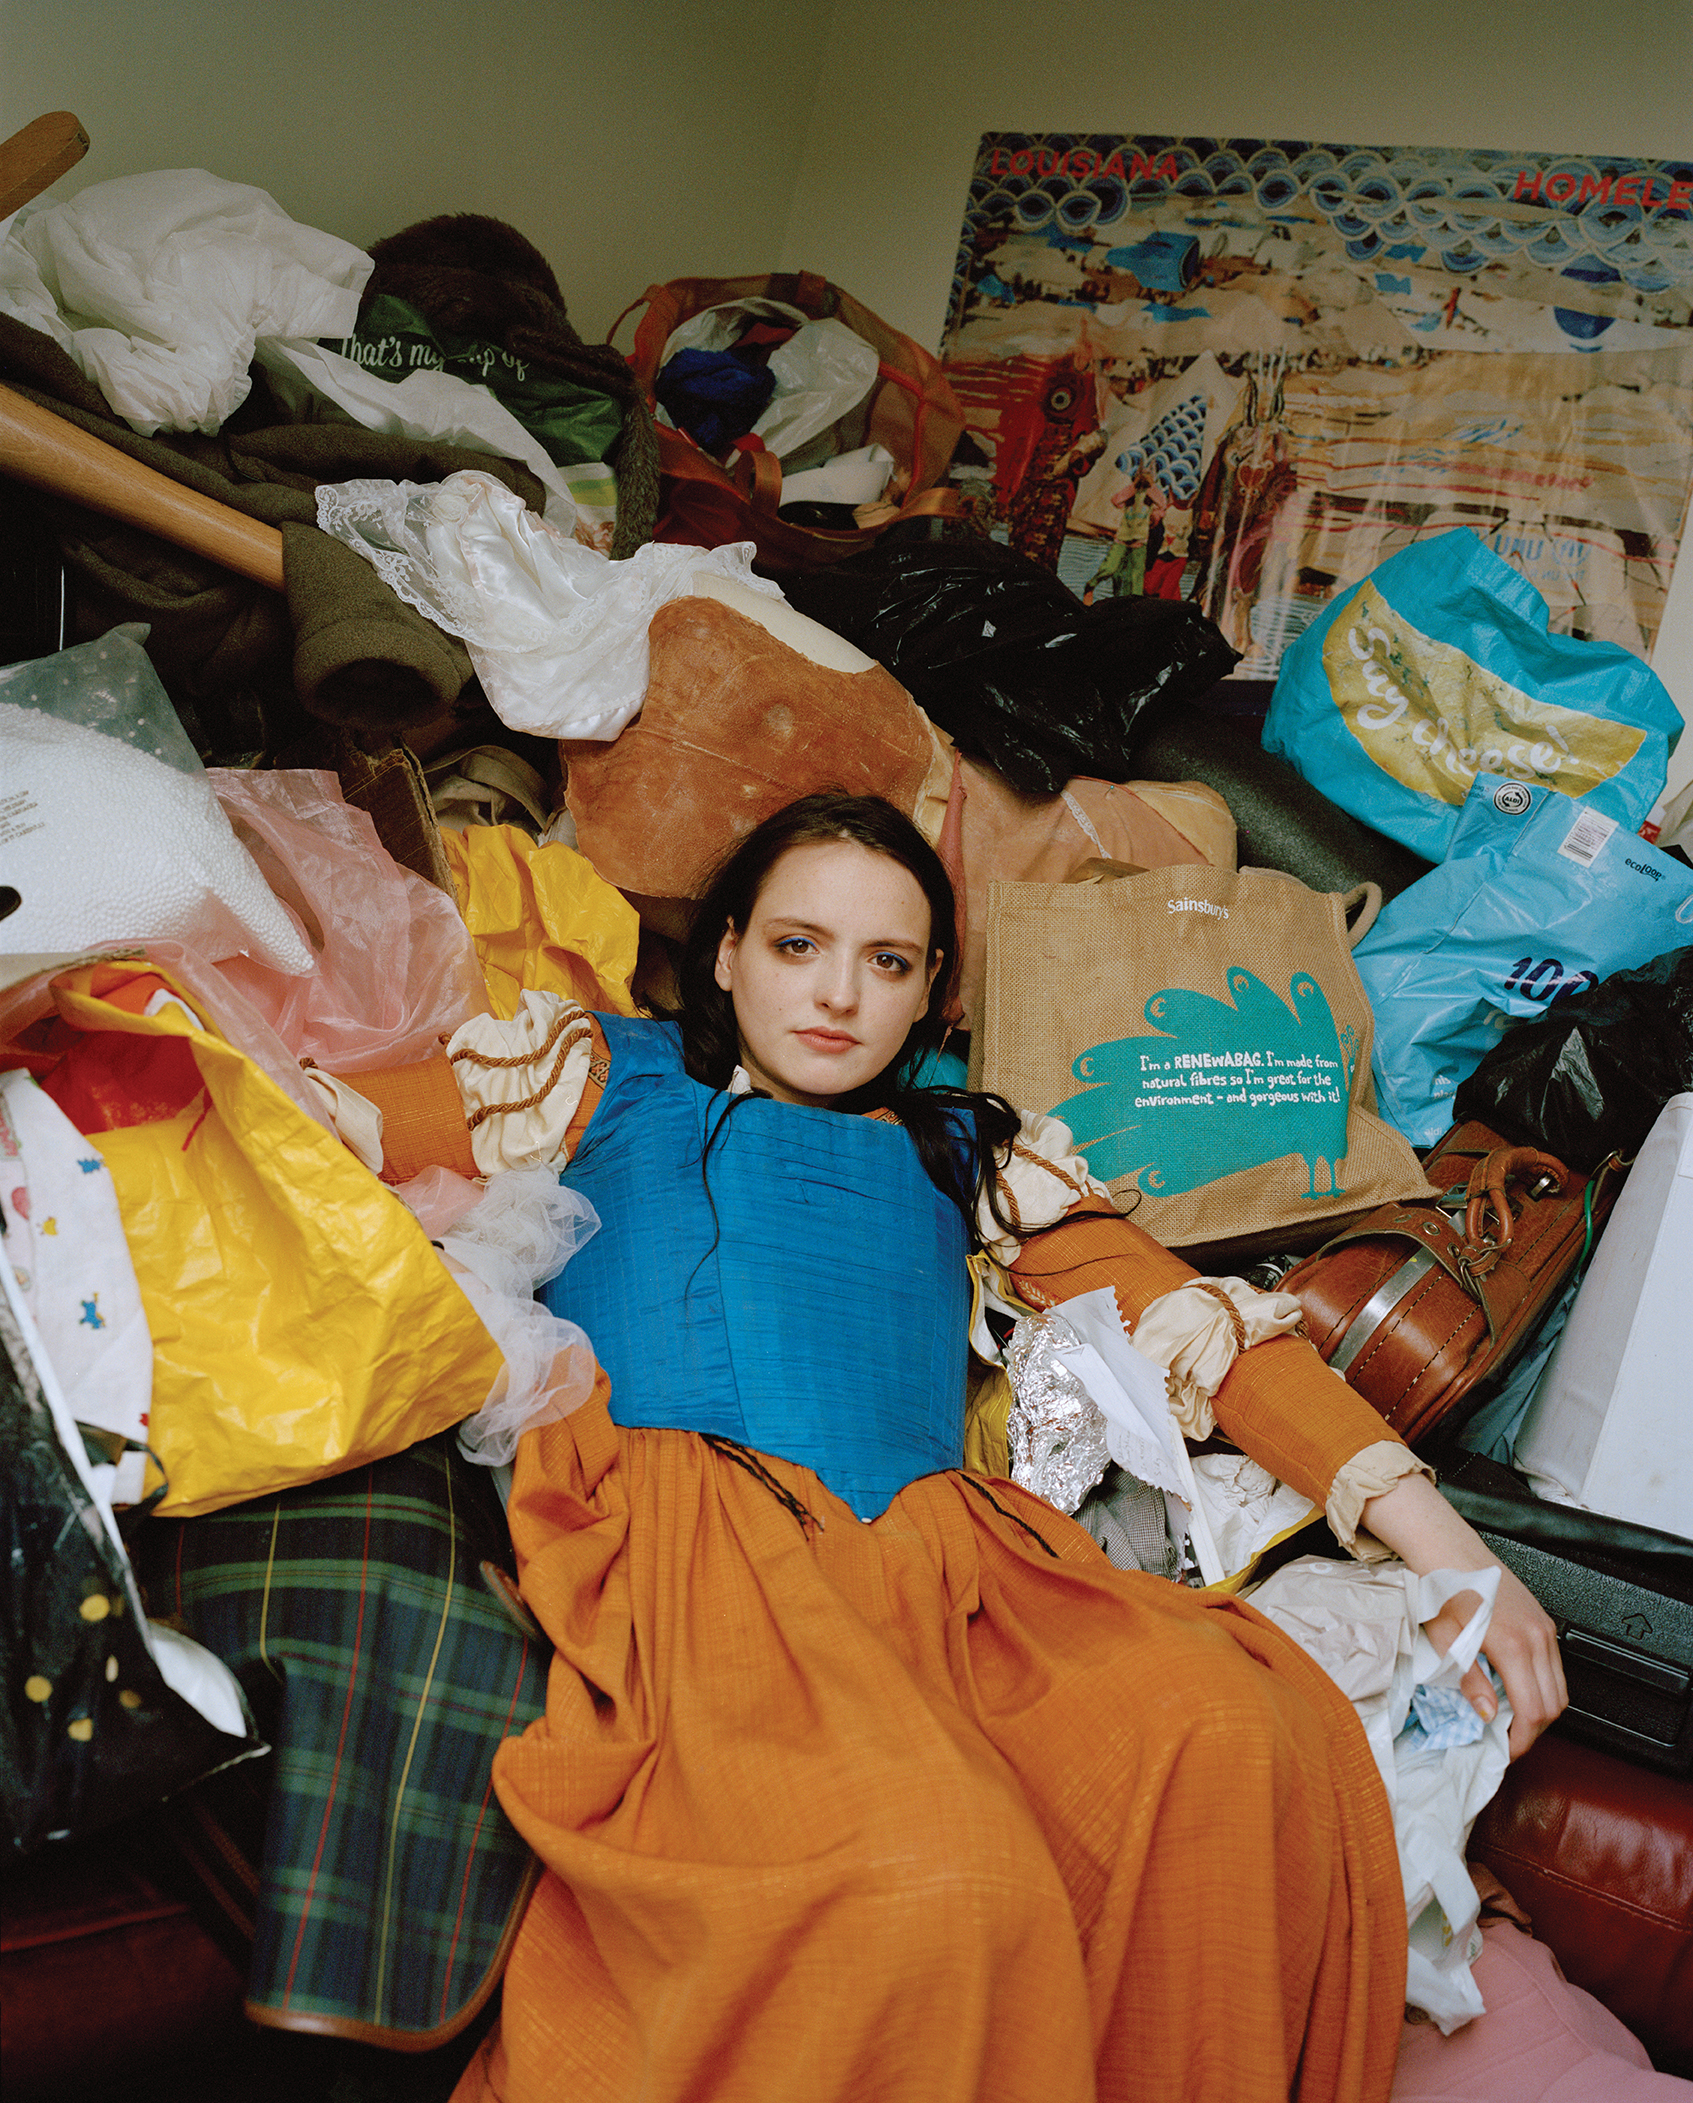 A woman sits on a bed crowded with clothes and bags.